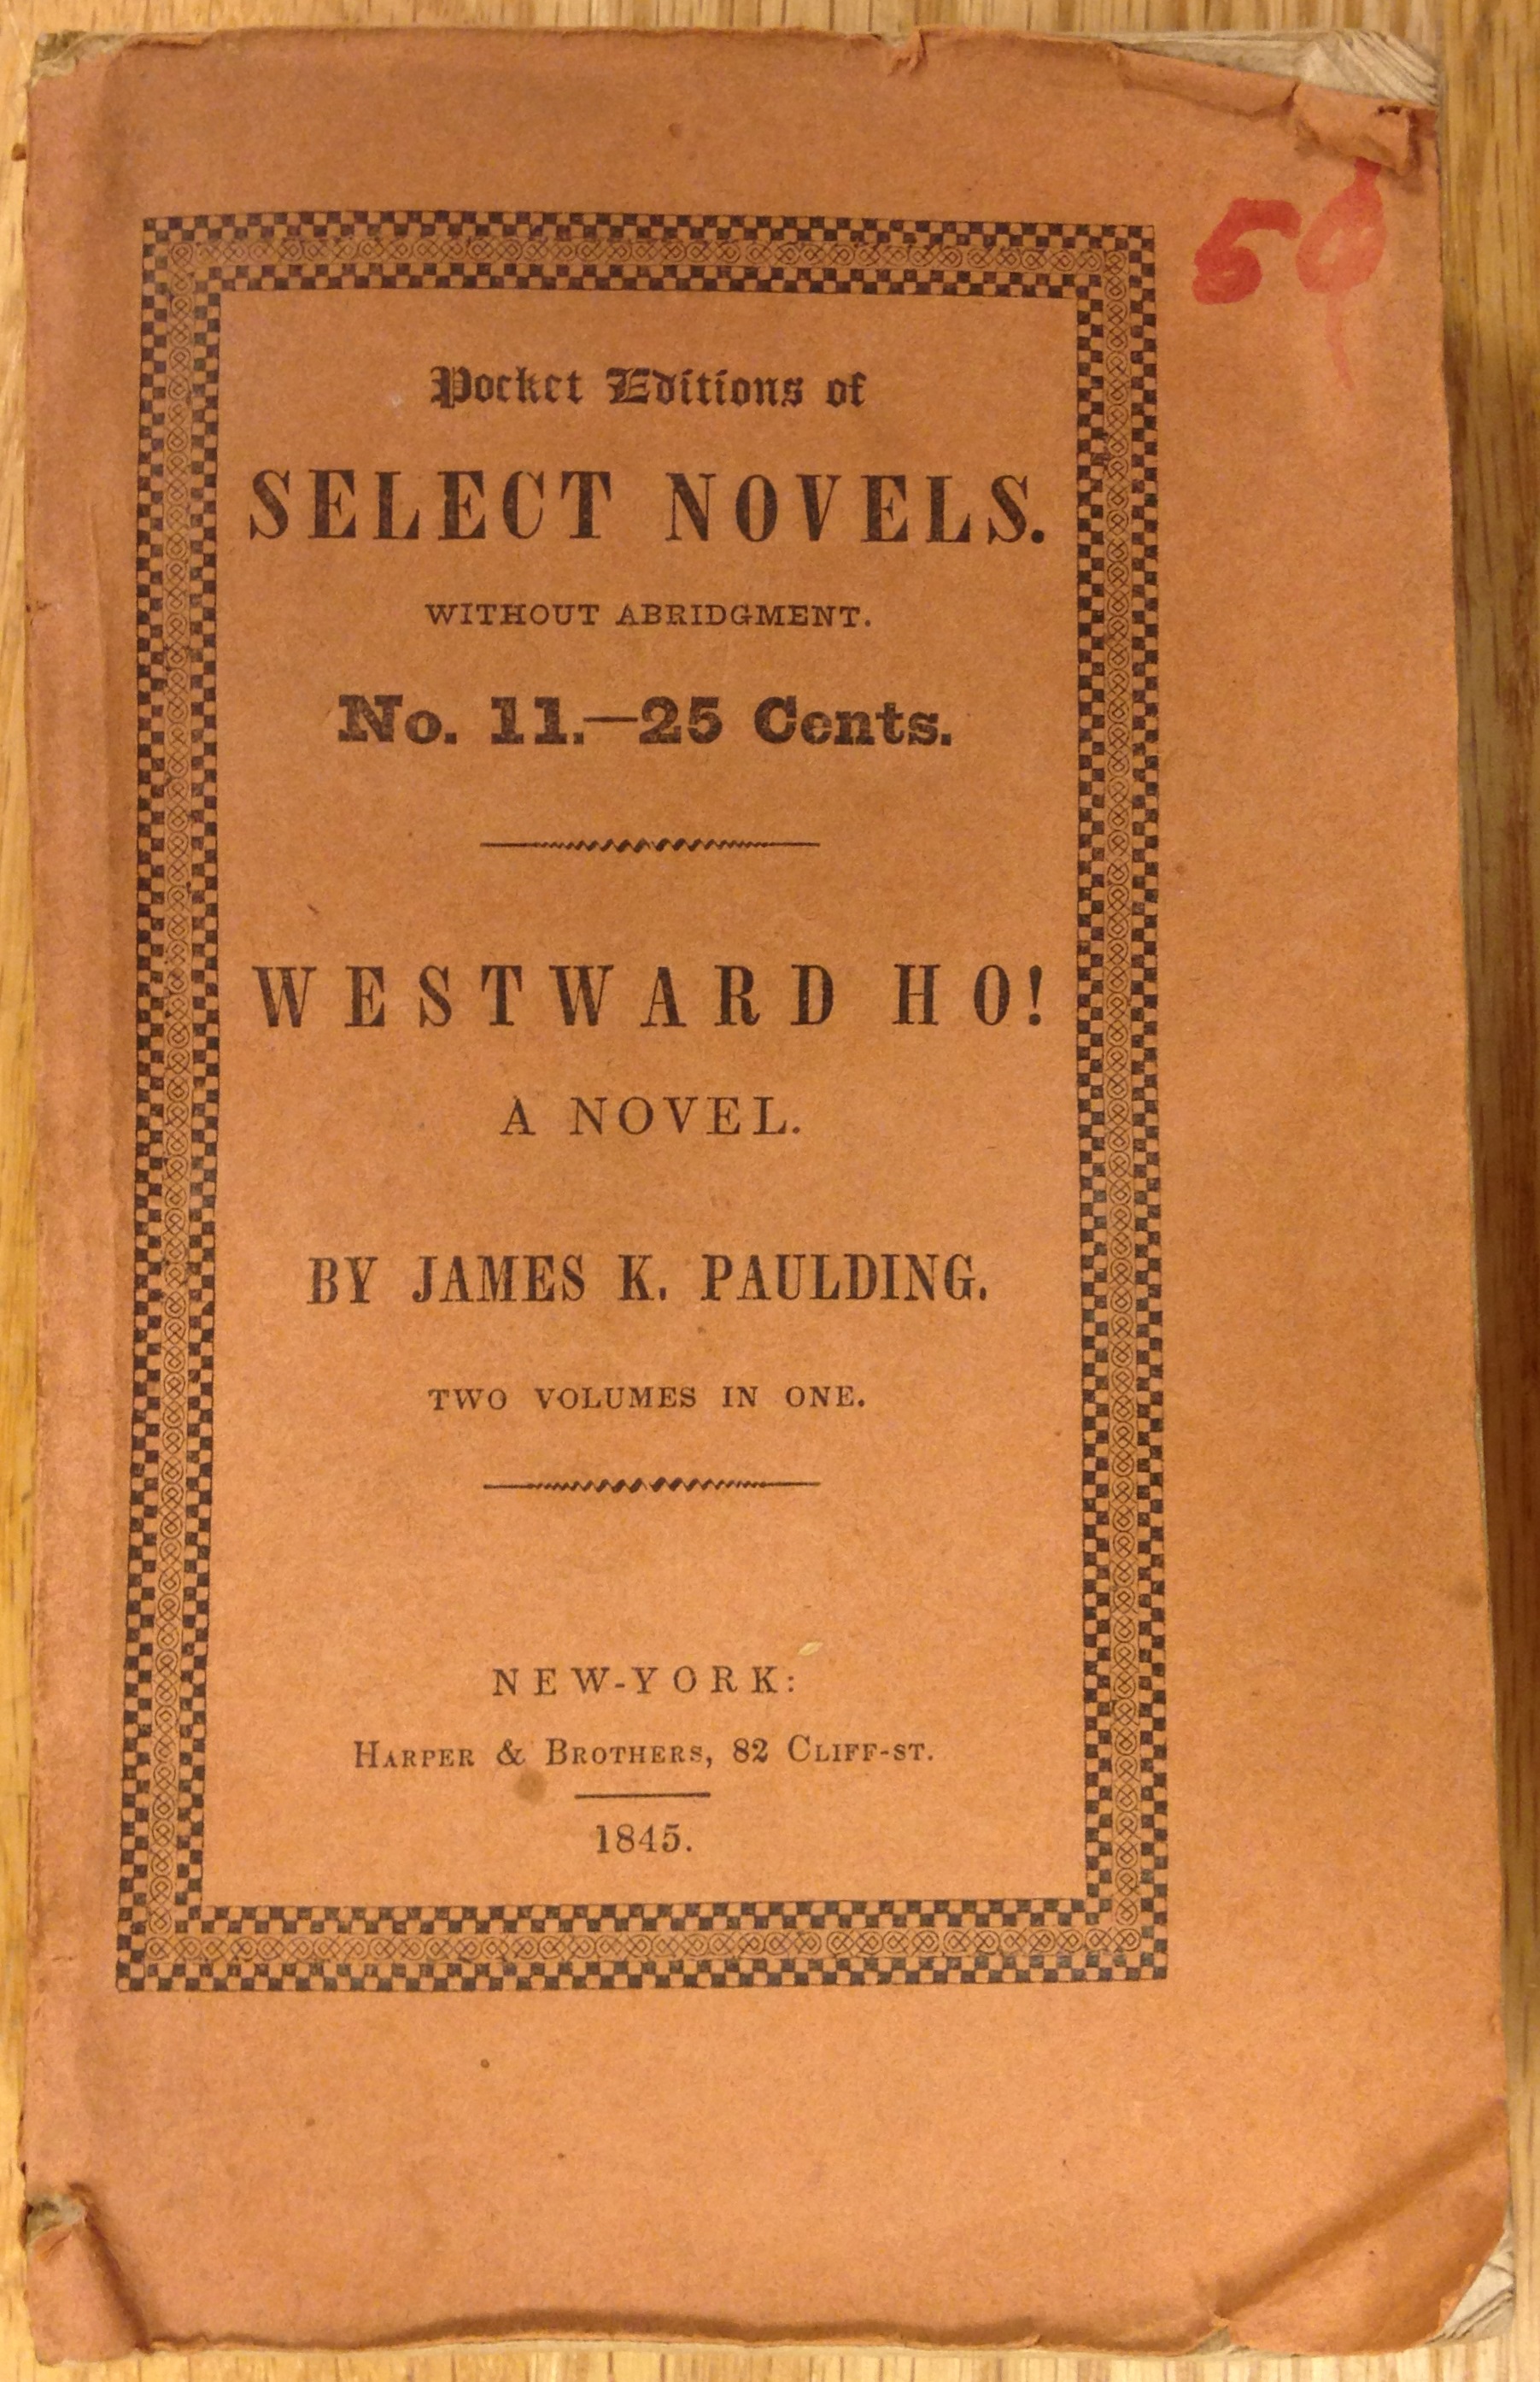 James K. Paulding's novel Westward Ho!, published in 1832, evidently was not the success Harper & Brothers anticipated. In 1845 unsold sheets (with title pages dated 1832) were reissued in less expensive form in the "Pocket Editions of Select Novels" series, dated 1845 on the paper covers.